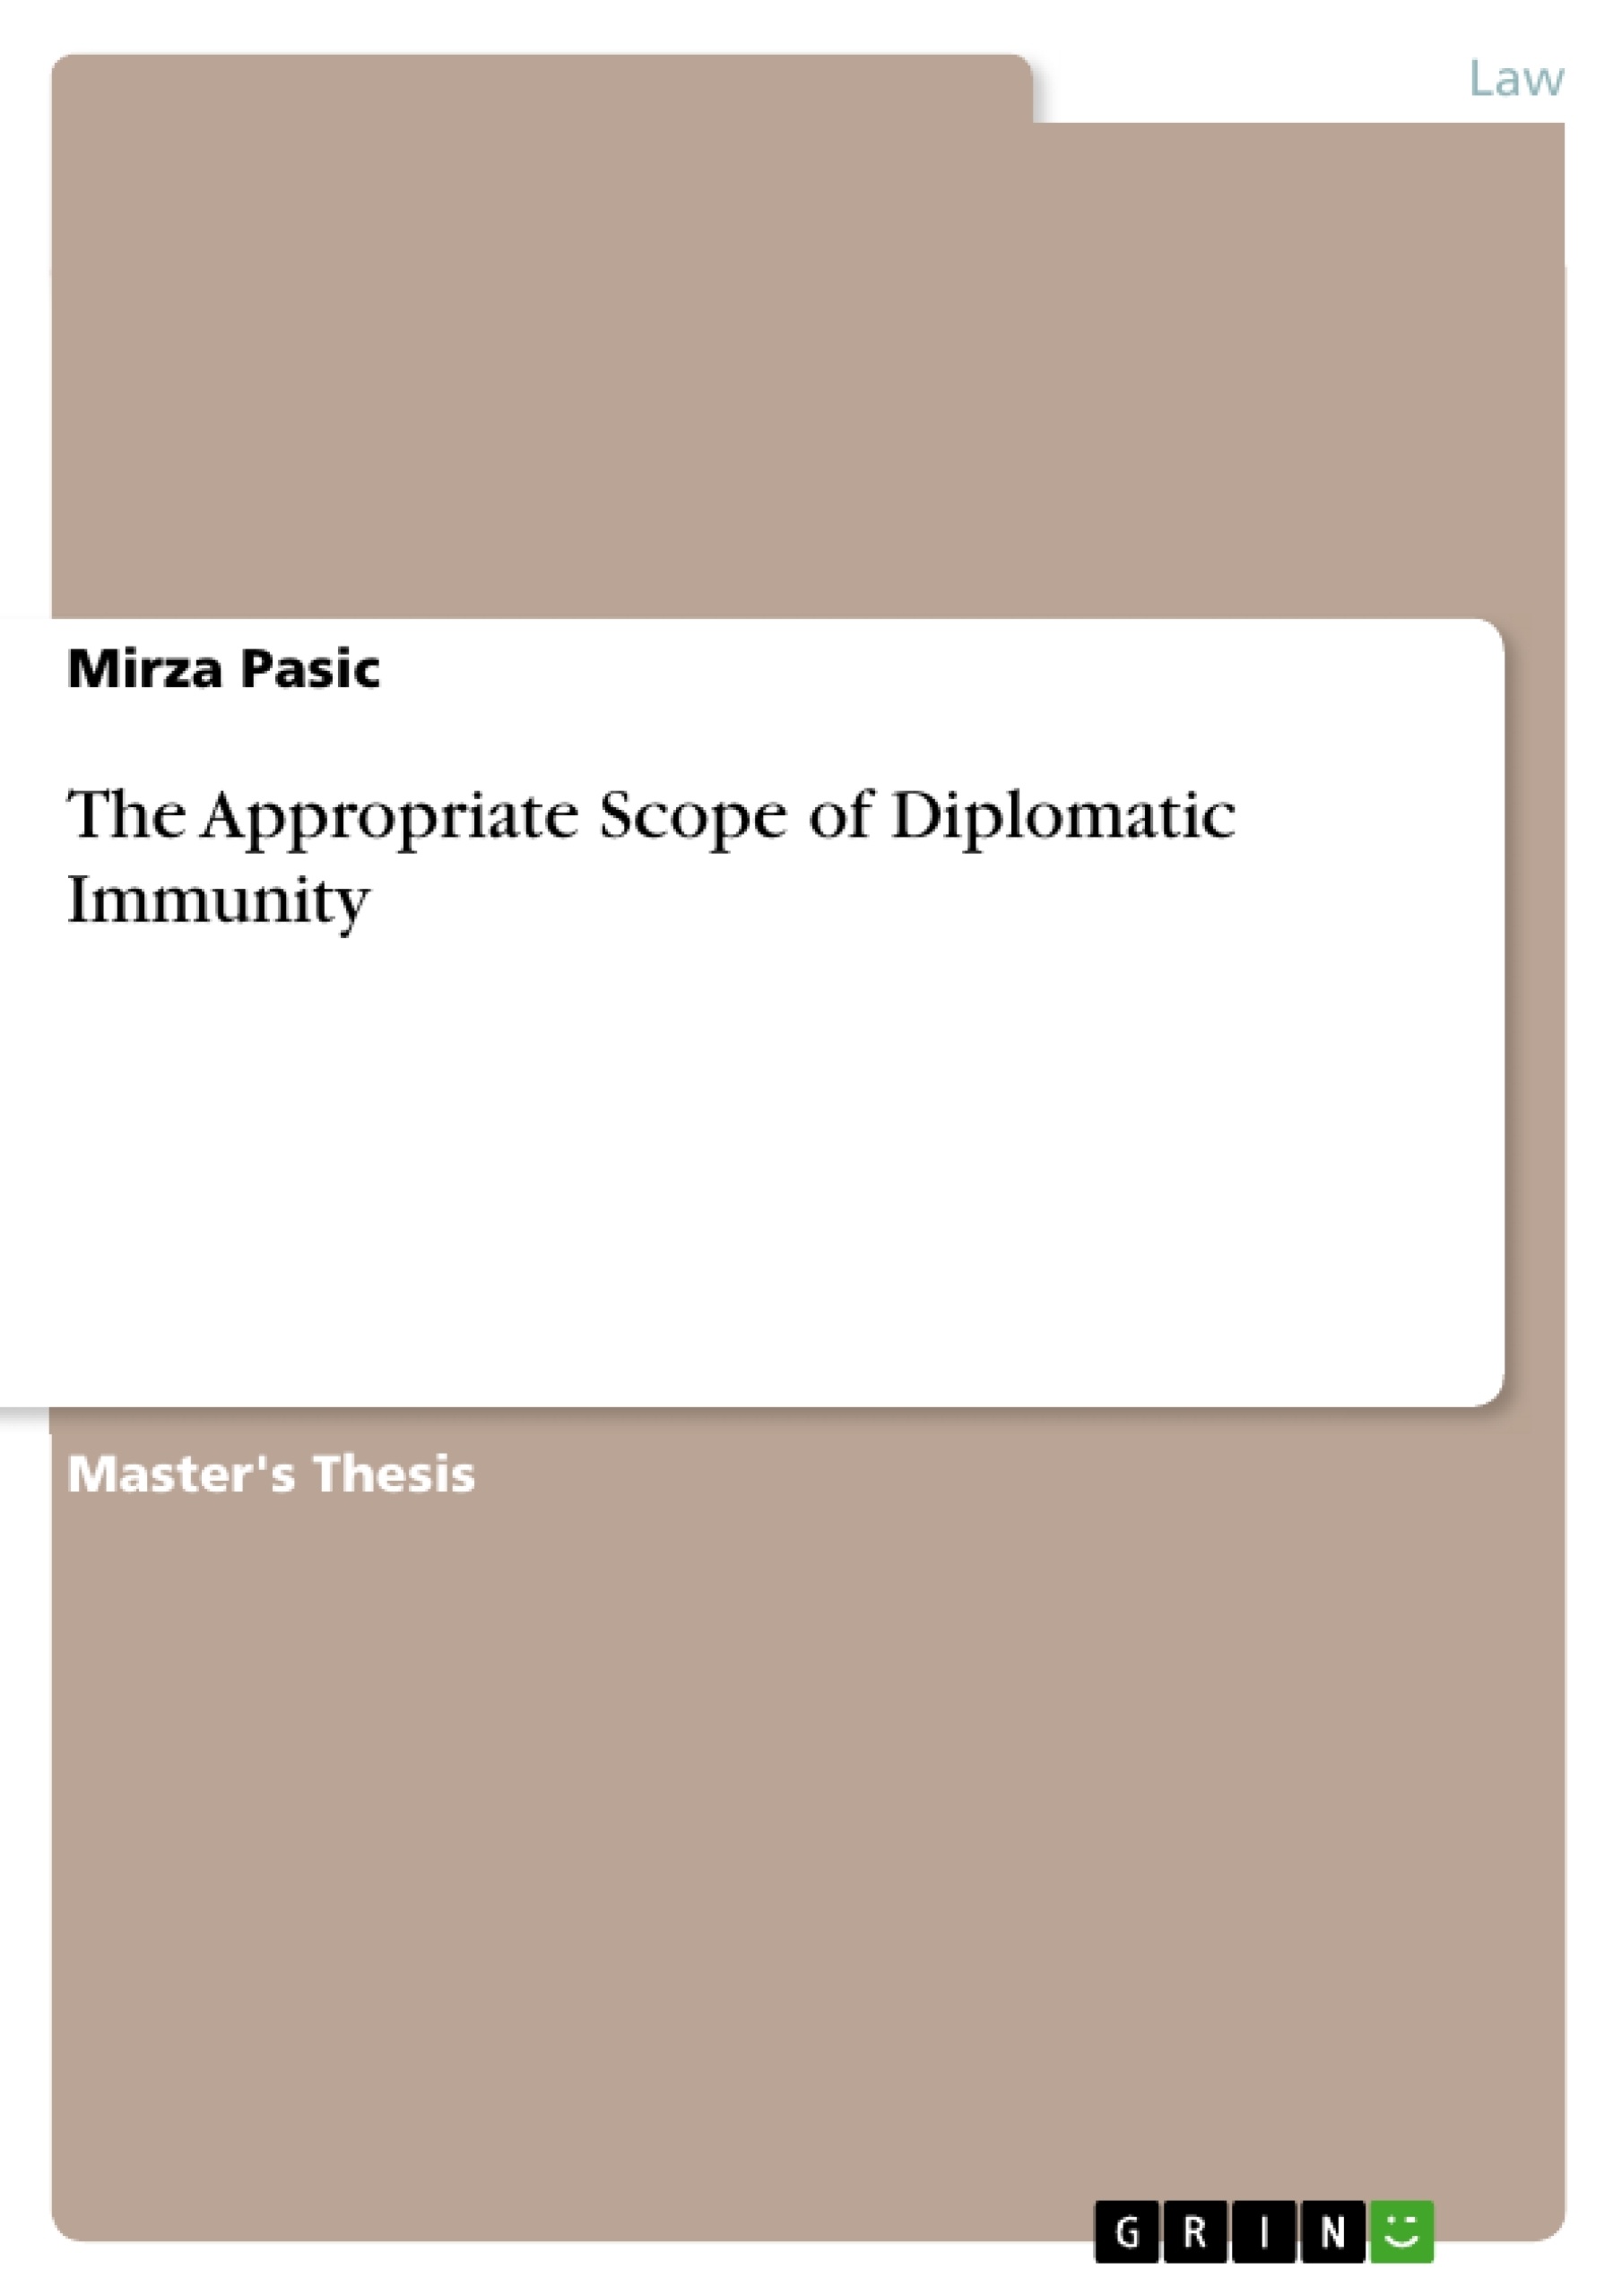 Title: The Appropriate Scope of Diplomatic Immunity